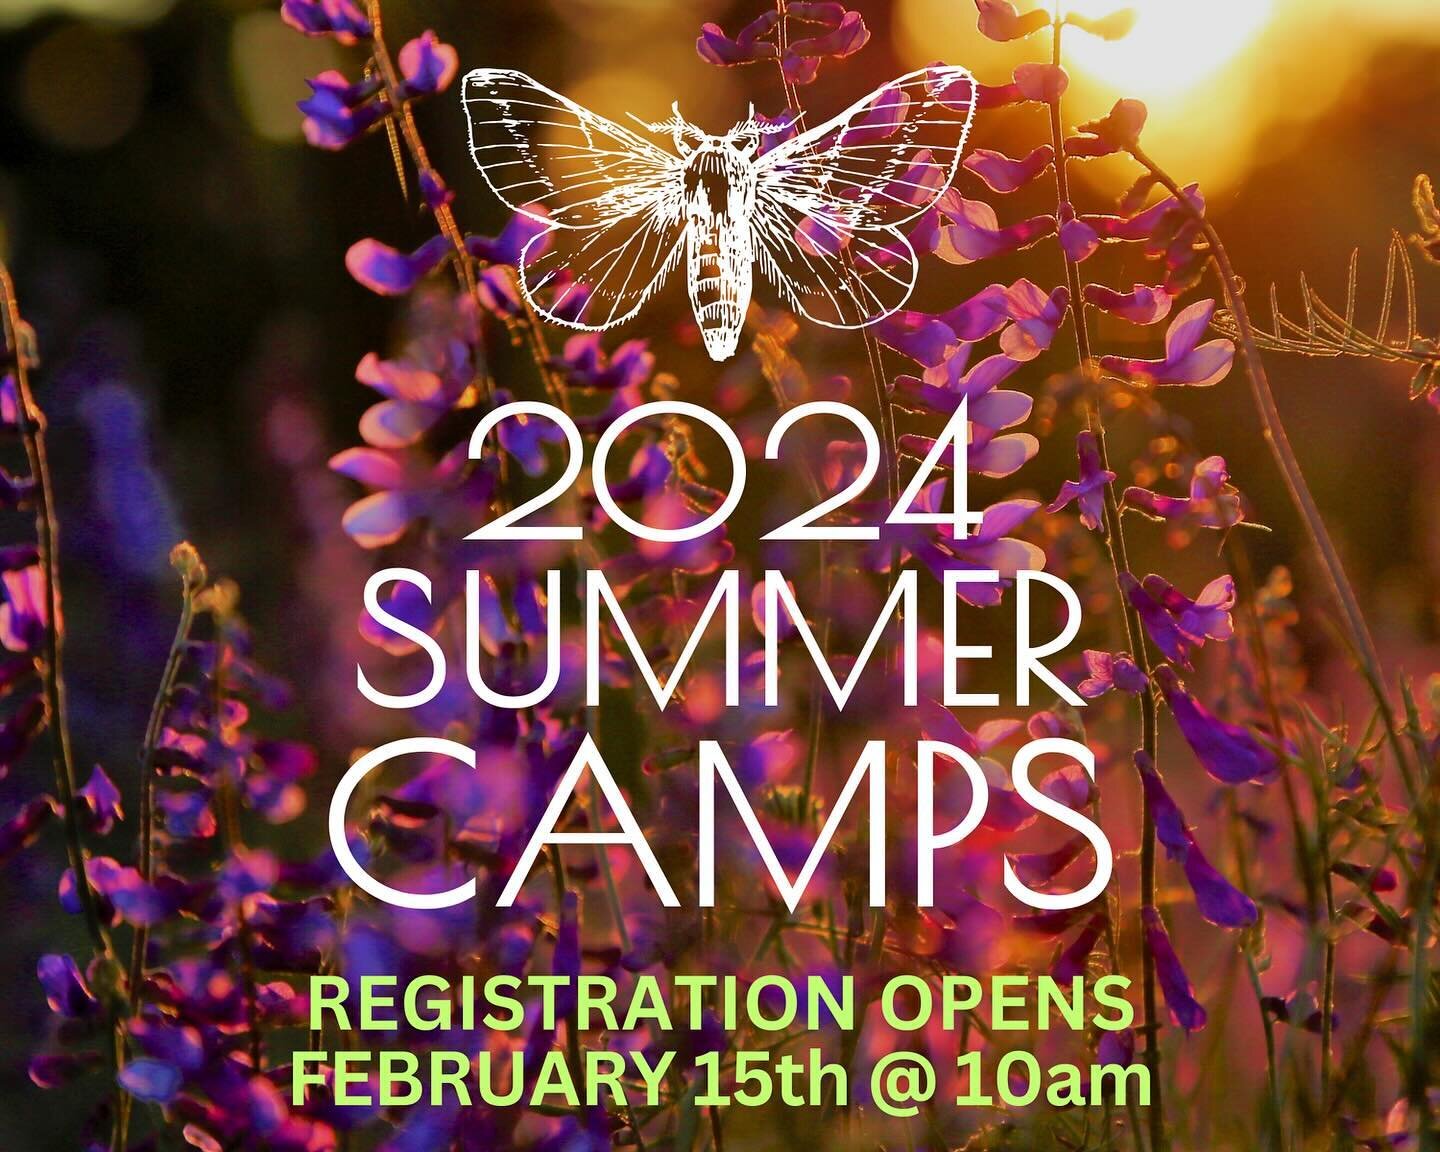 Our summer camp schedule is posted! Registration will open at 10am on February 15th. 

We LOVE when the season wheel comes around to Summer! Wild Roots offers a variety of summer camps aimed at getting kids outdoors and exploring their wild creativit